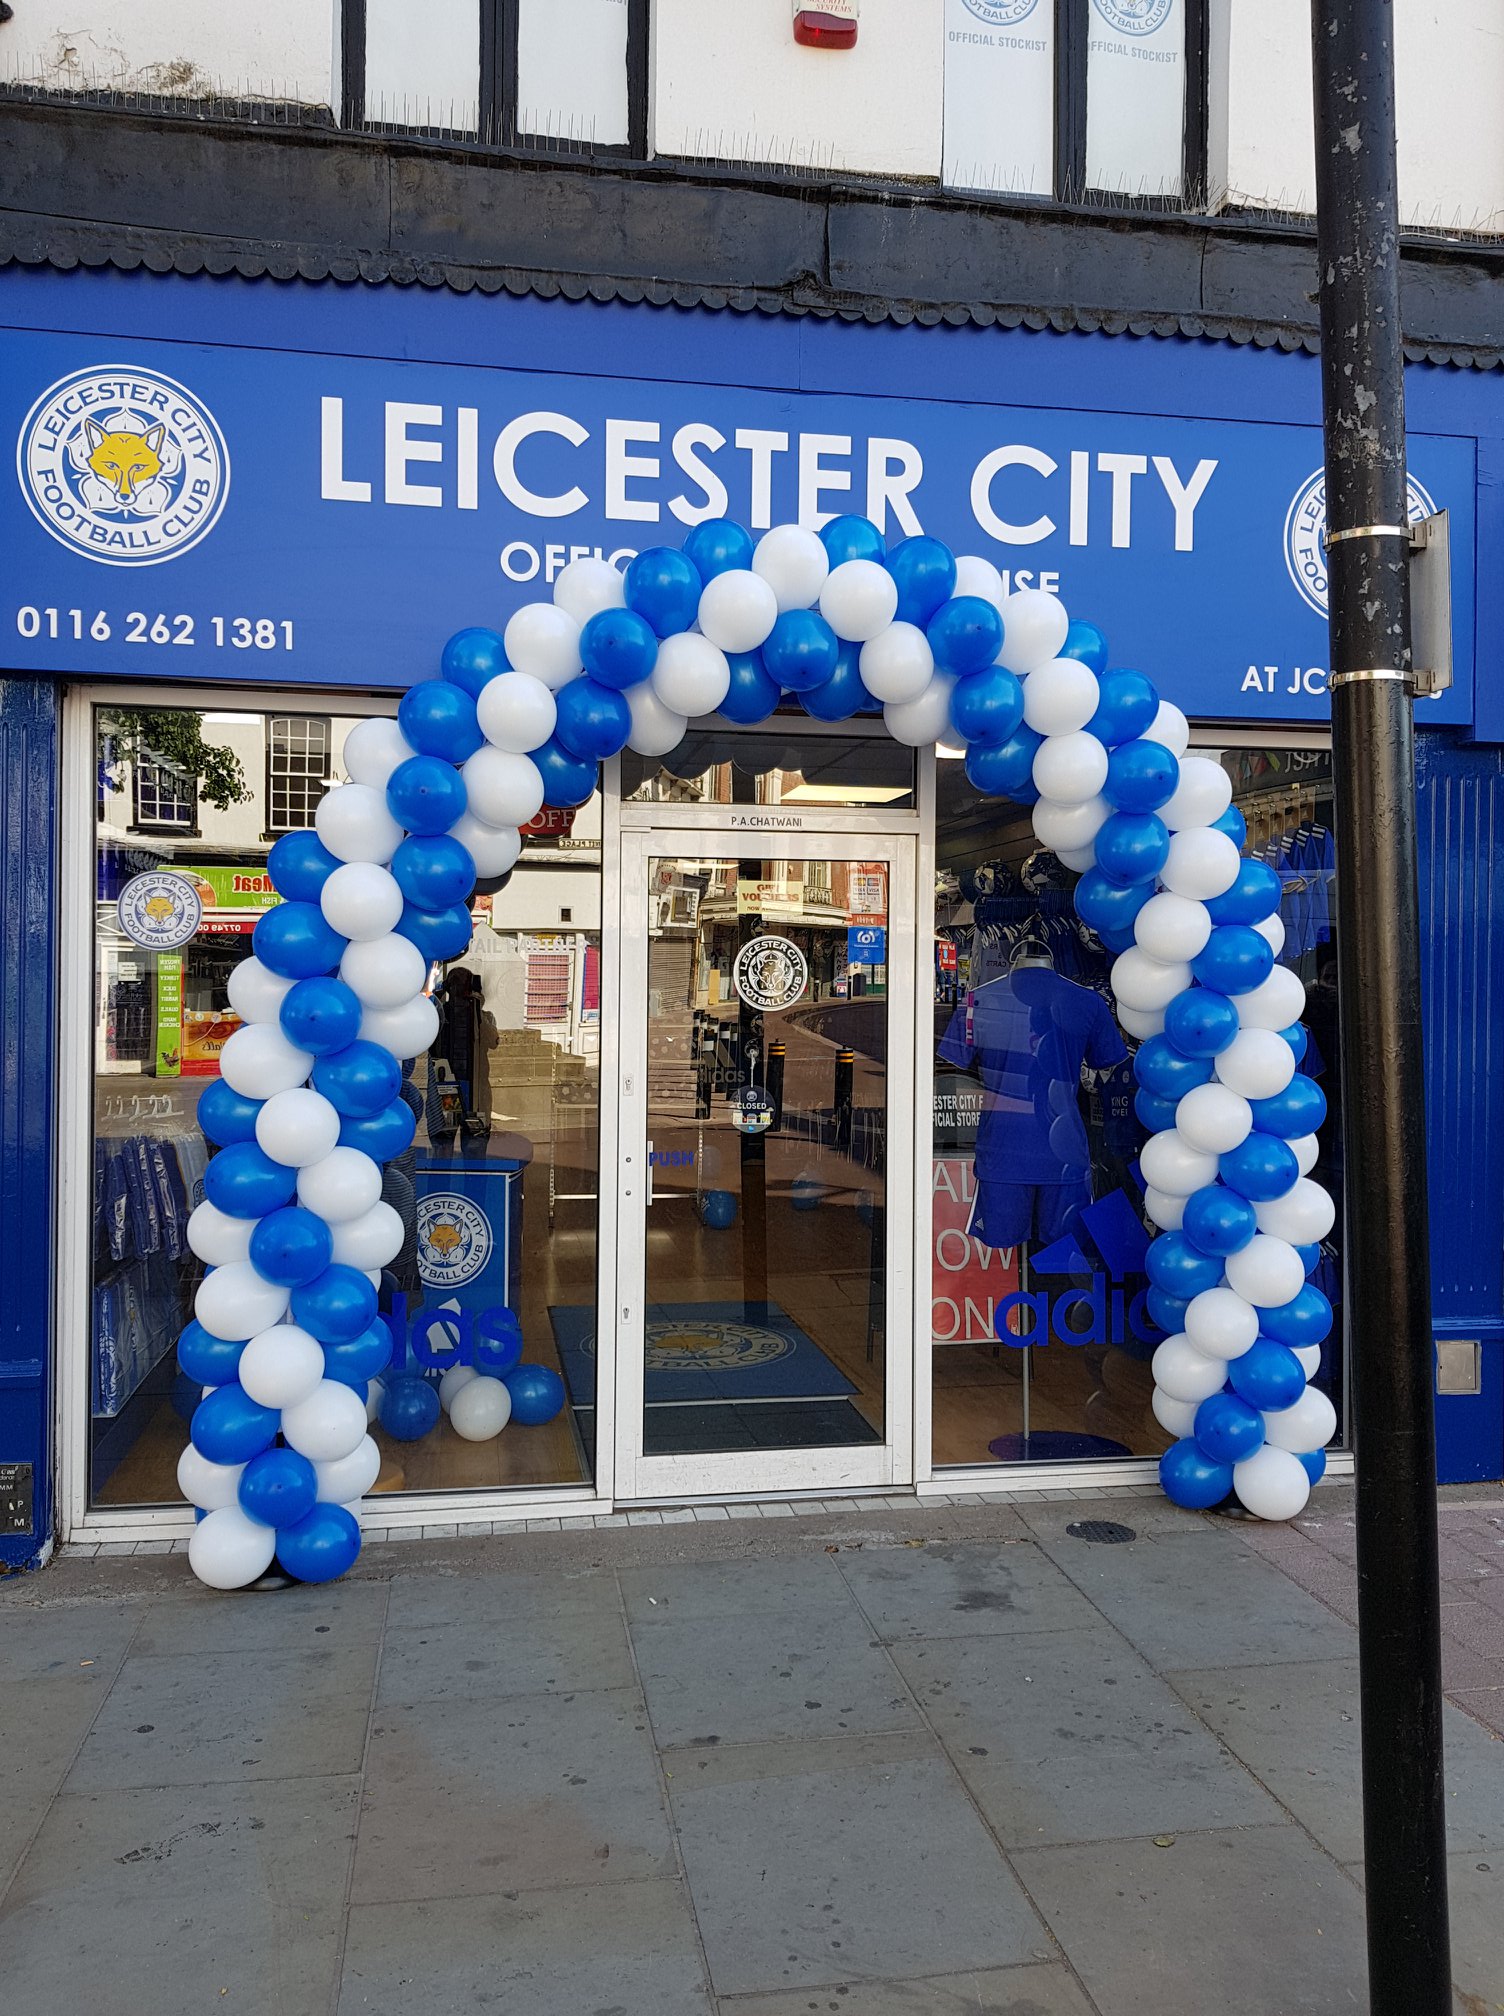 jc sports leicester